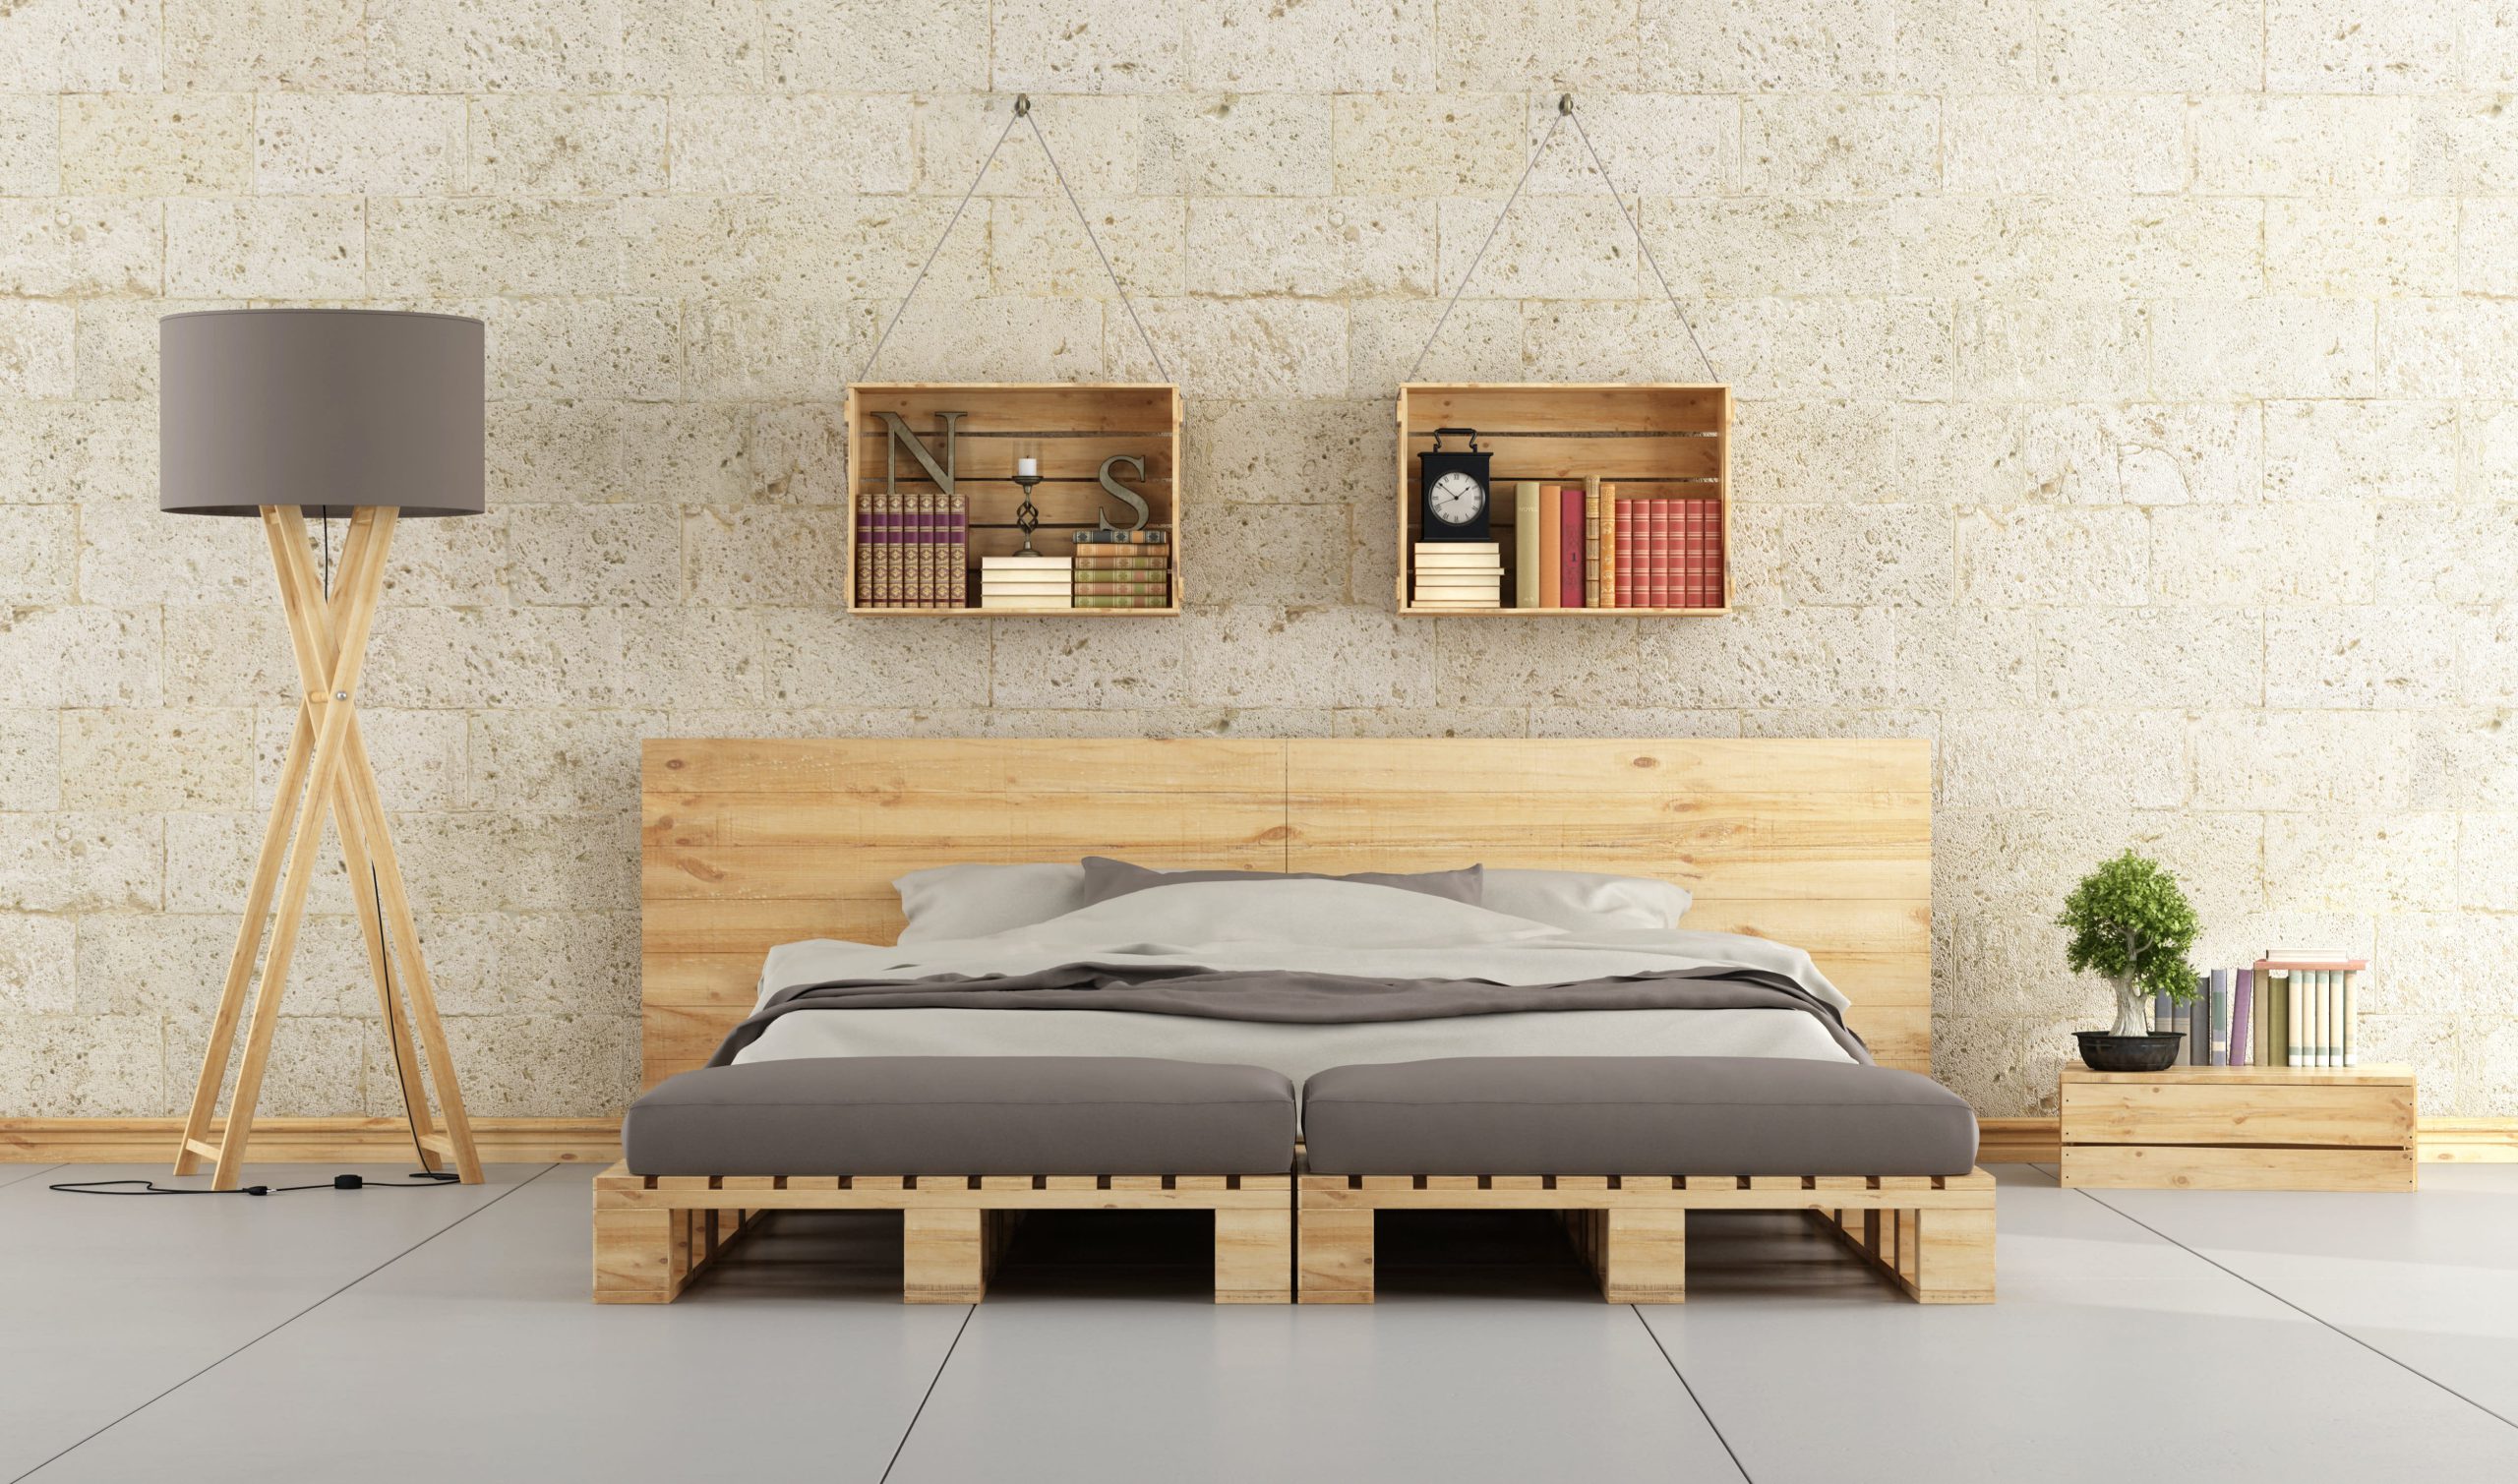 Wooden Pallets in an Industrial Style Bedroom